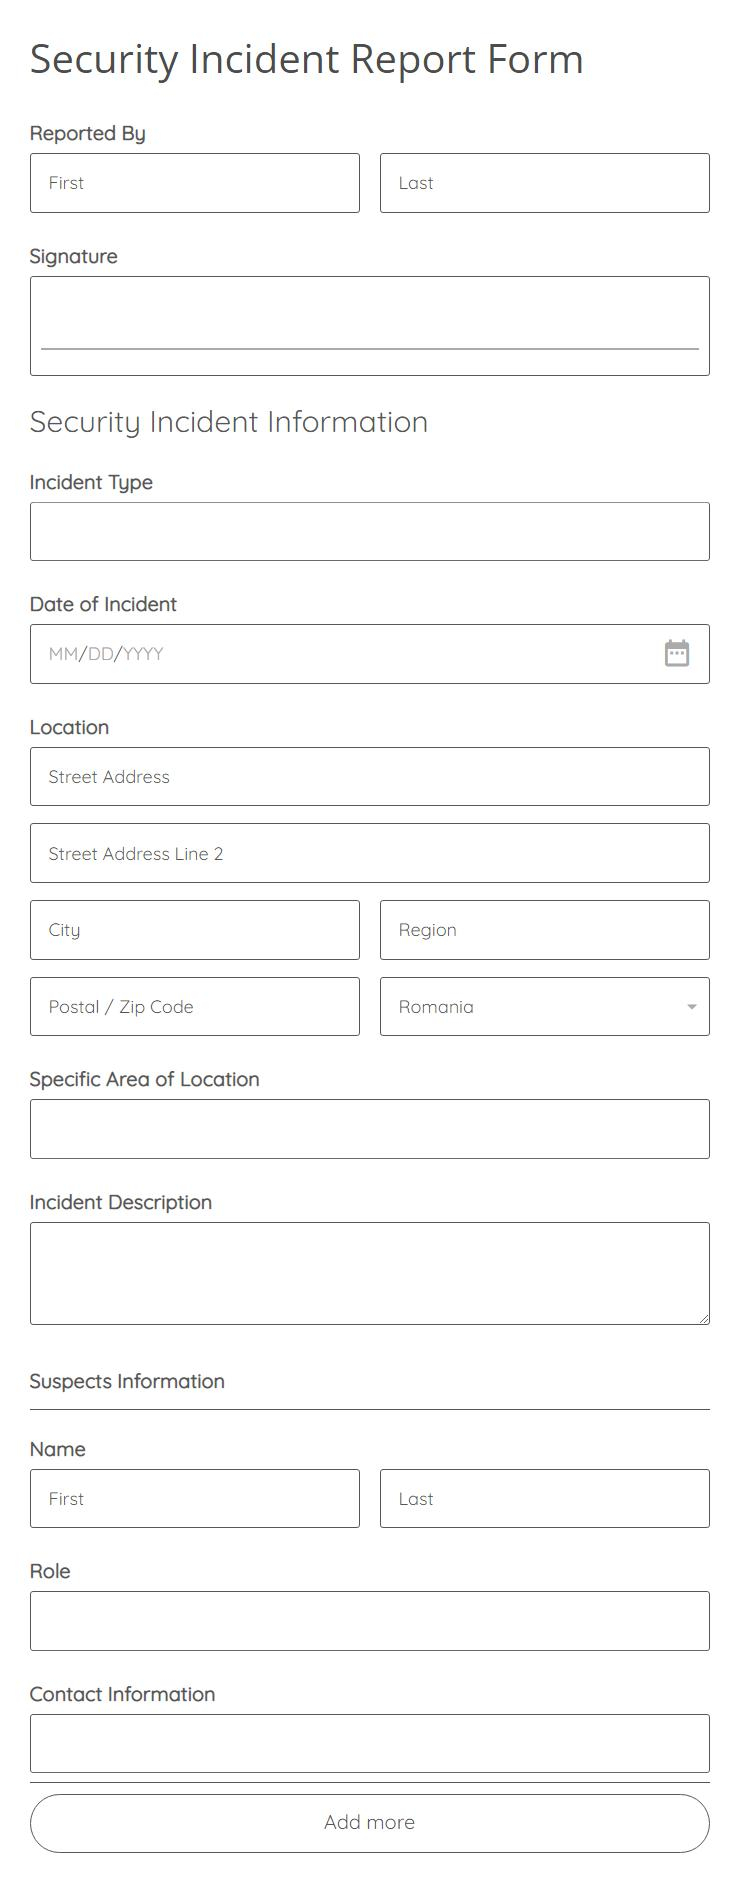 Security Incident Report Form Template  10 Form Builder